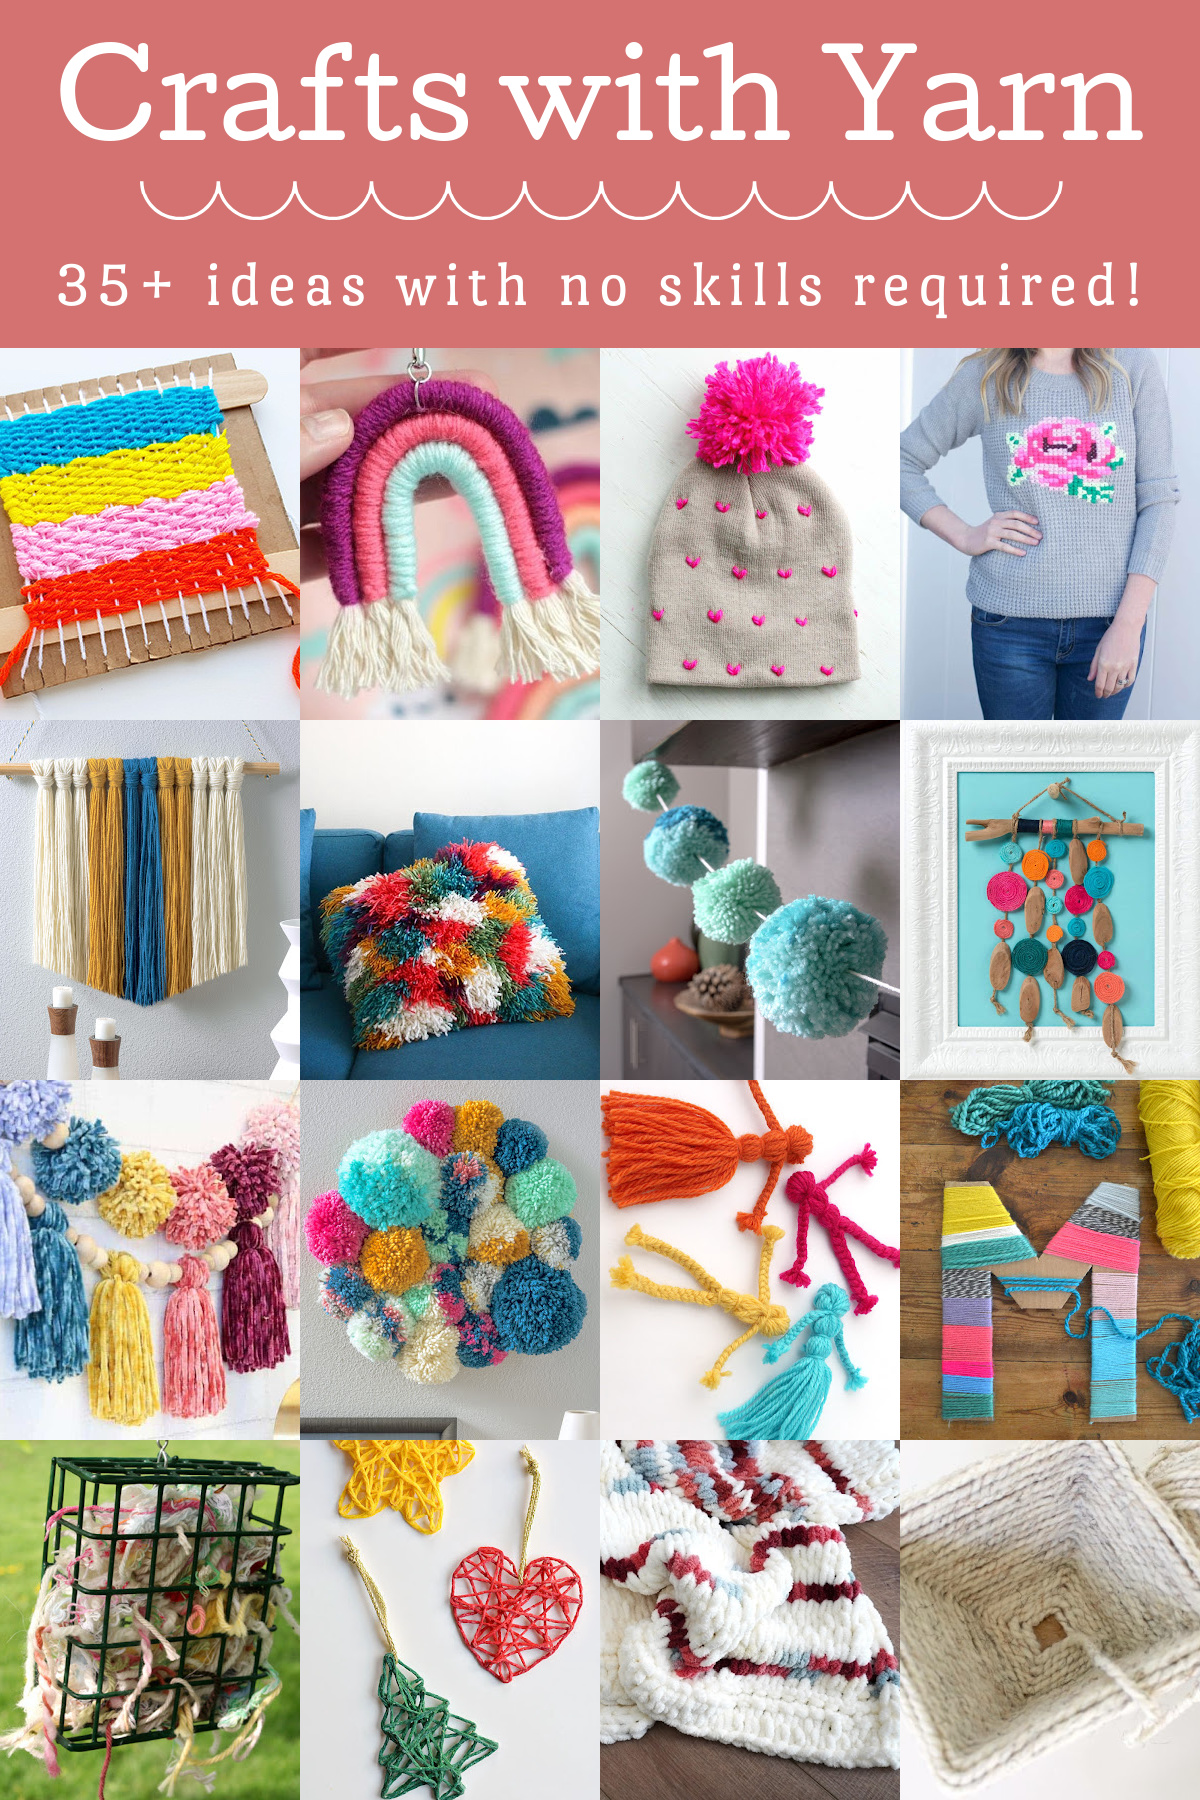 Yarn Crafts That Require No Skill to Make